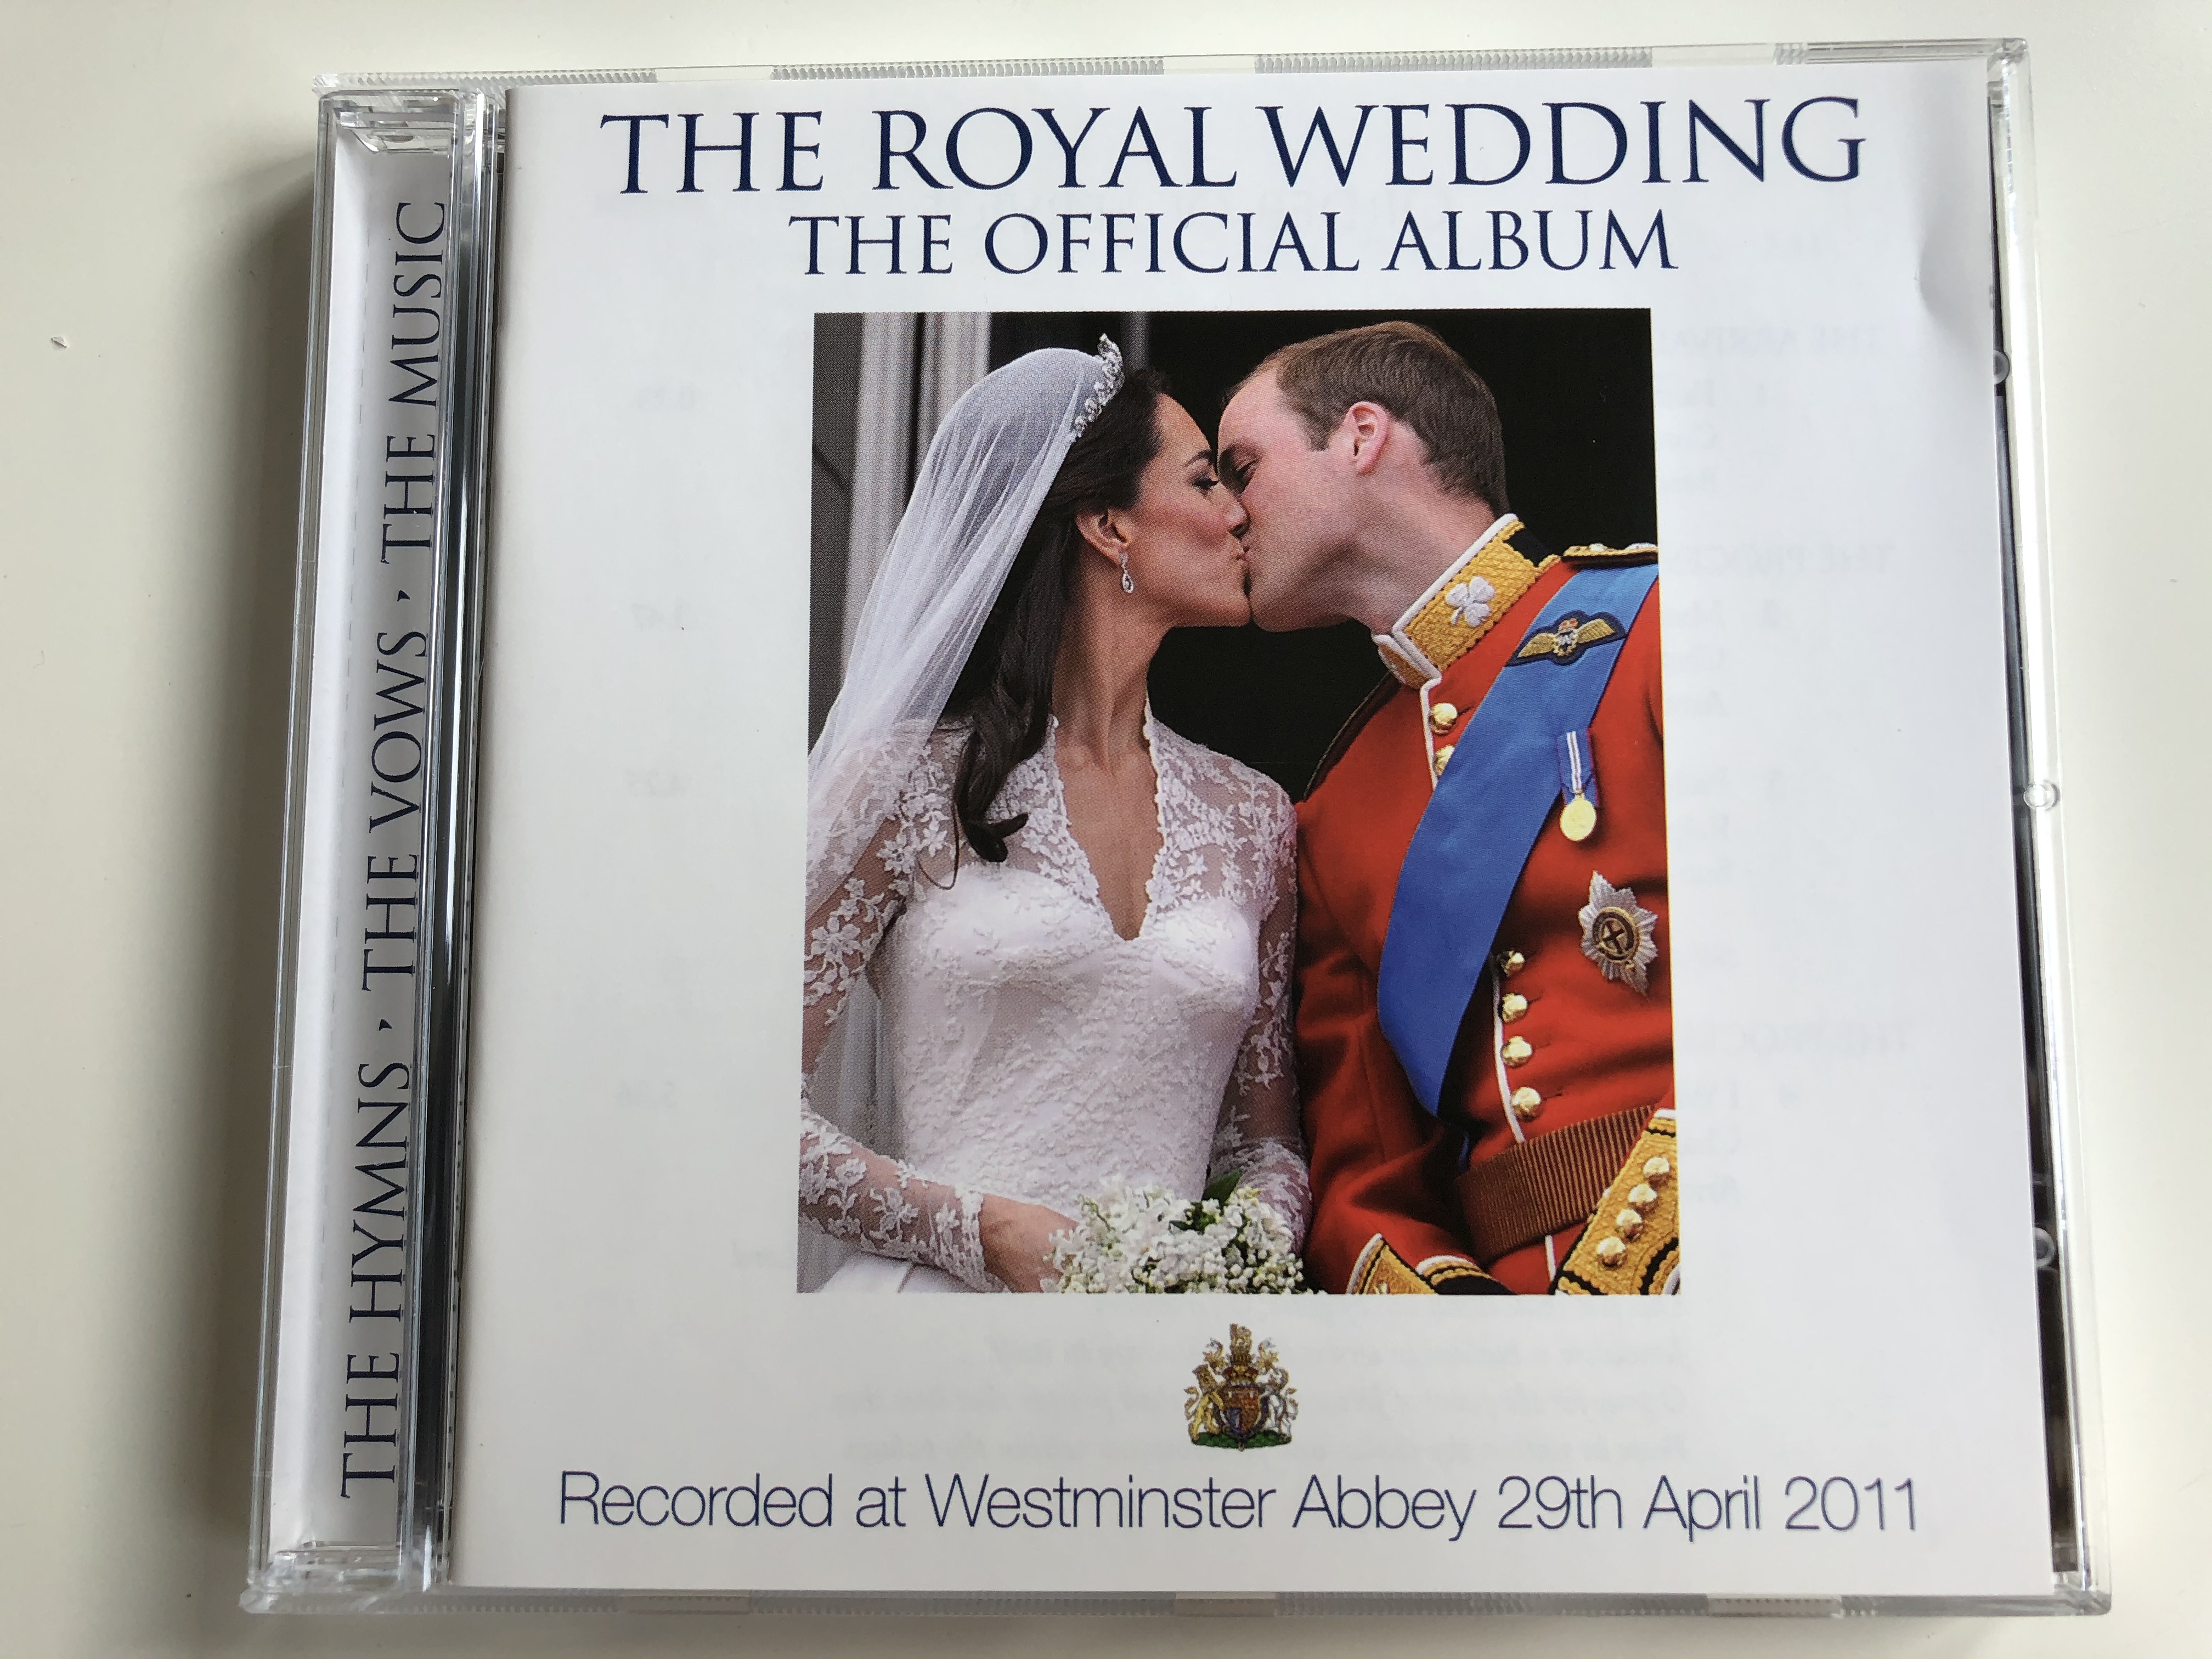 the-royal-wedding-the-official-album-recorded-at-westminster-abbey-29th-april-2011-decca-audio-cd-2011-2768422-1-.jpg